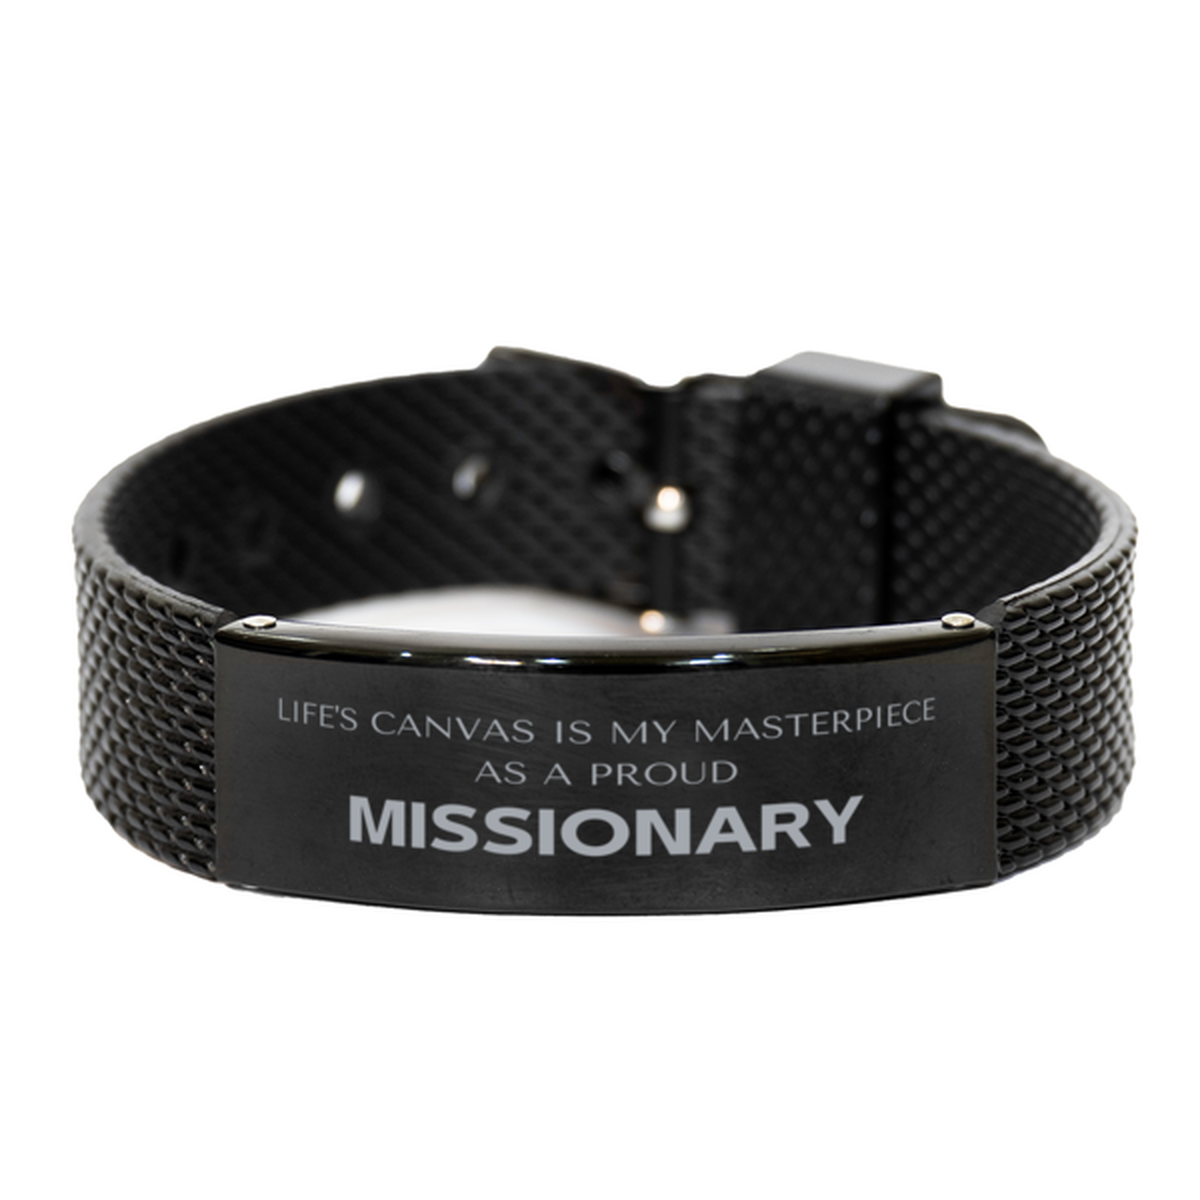 Proud Missionary Gifts, Life's canvas is my masterpiece, Epic Birthday Christmas Unique Black Shark Mesh Bracelet For Missionary, Coworkers, Men, Women, Friends